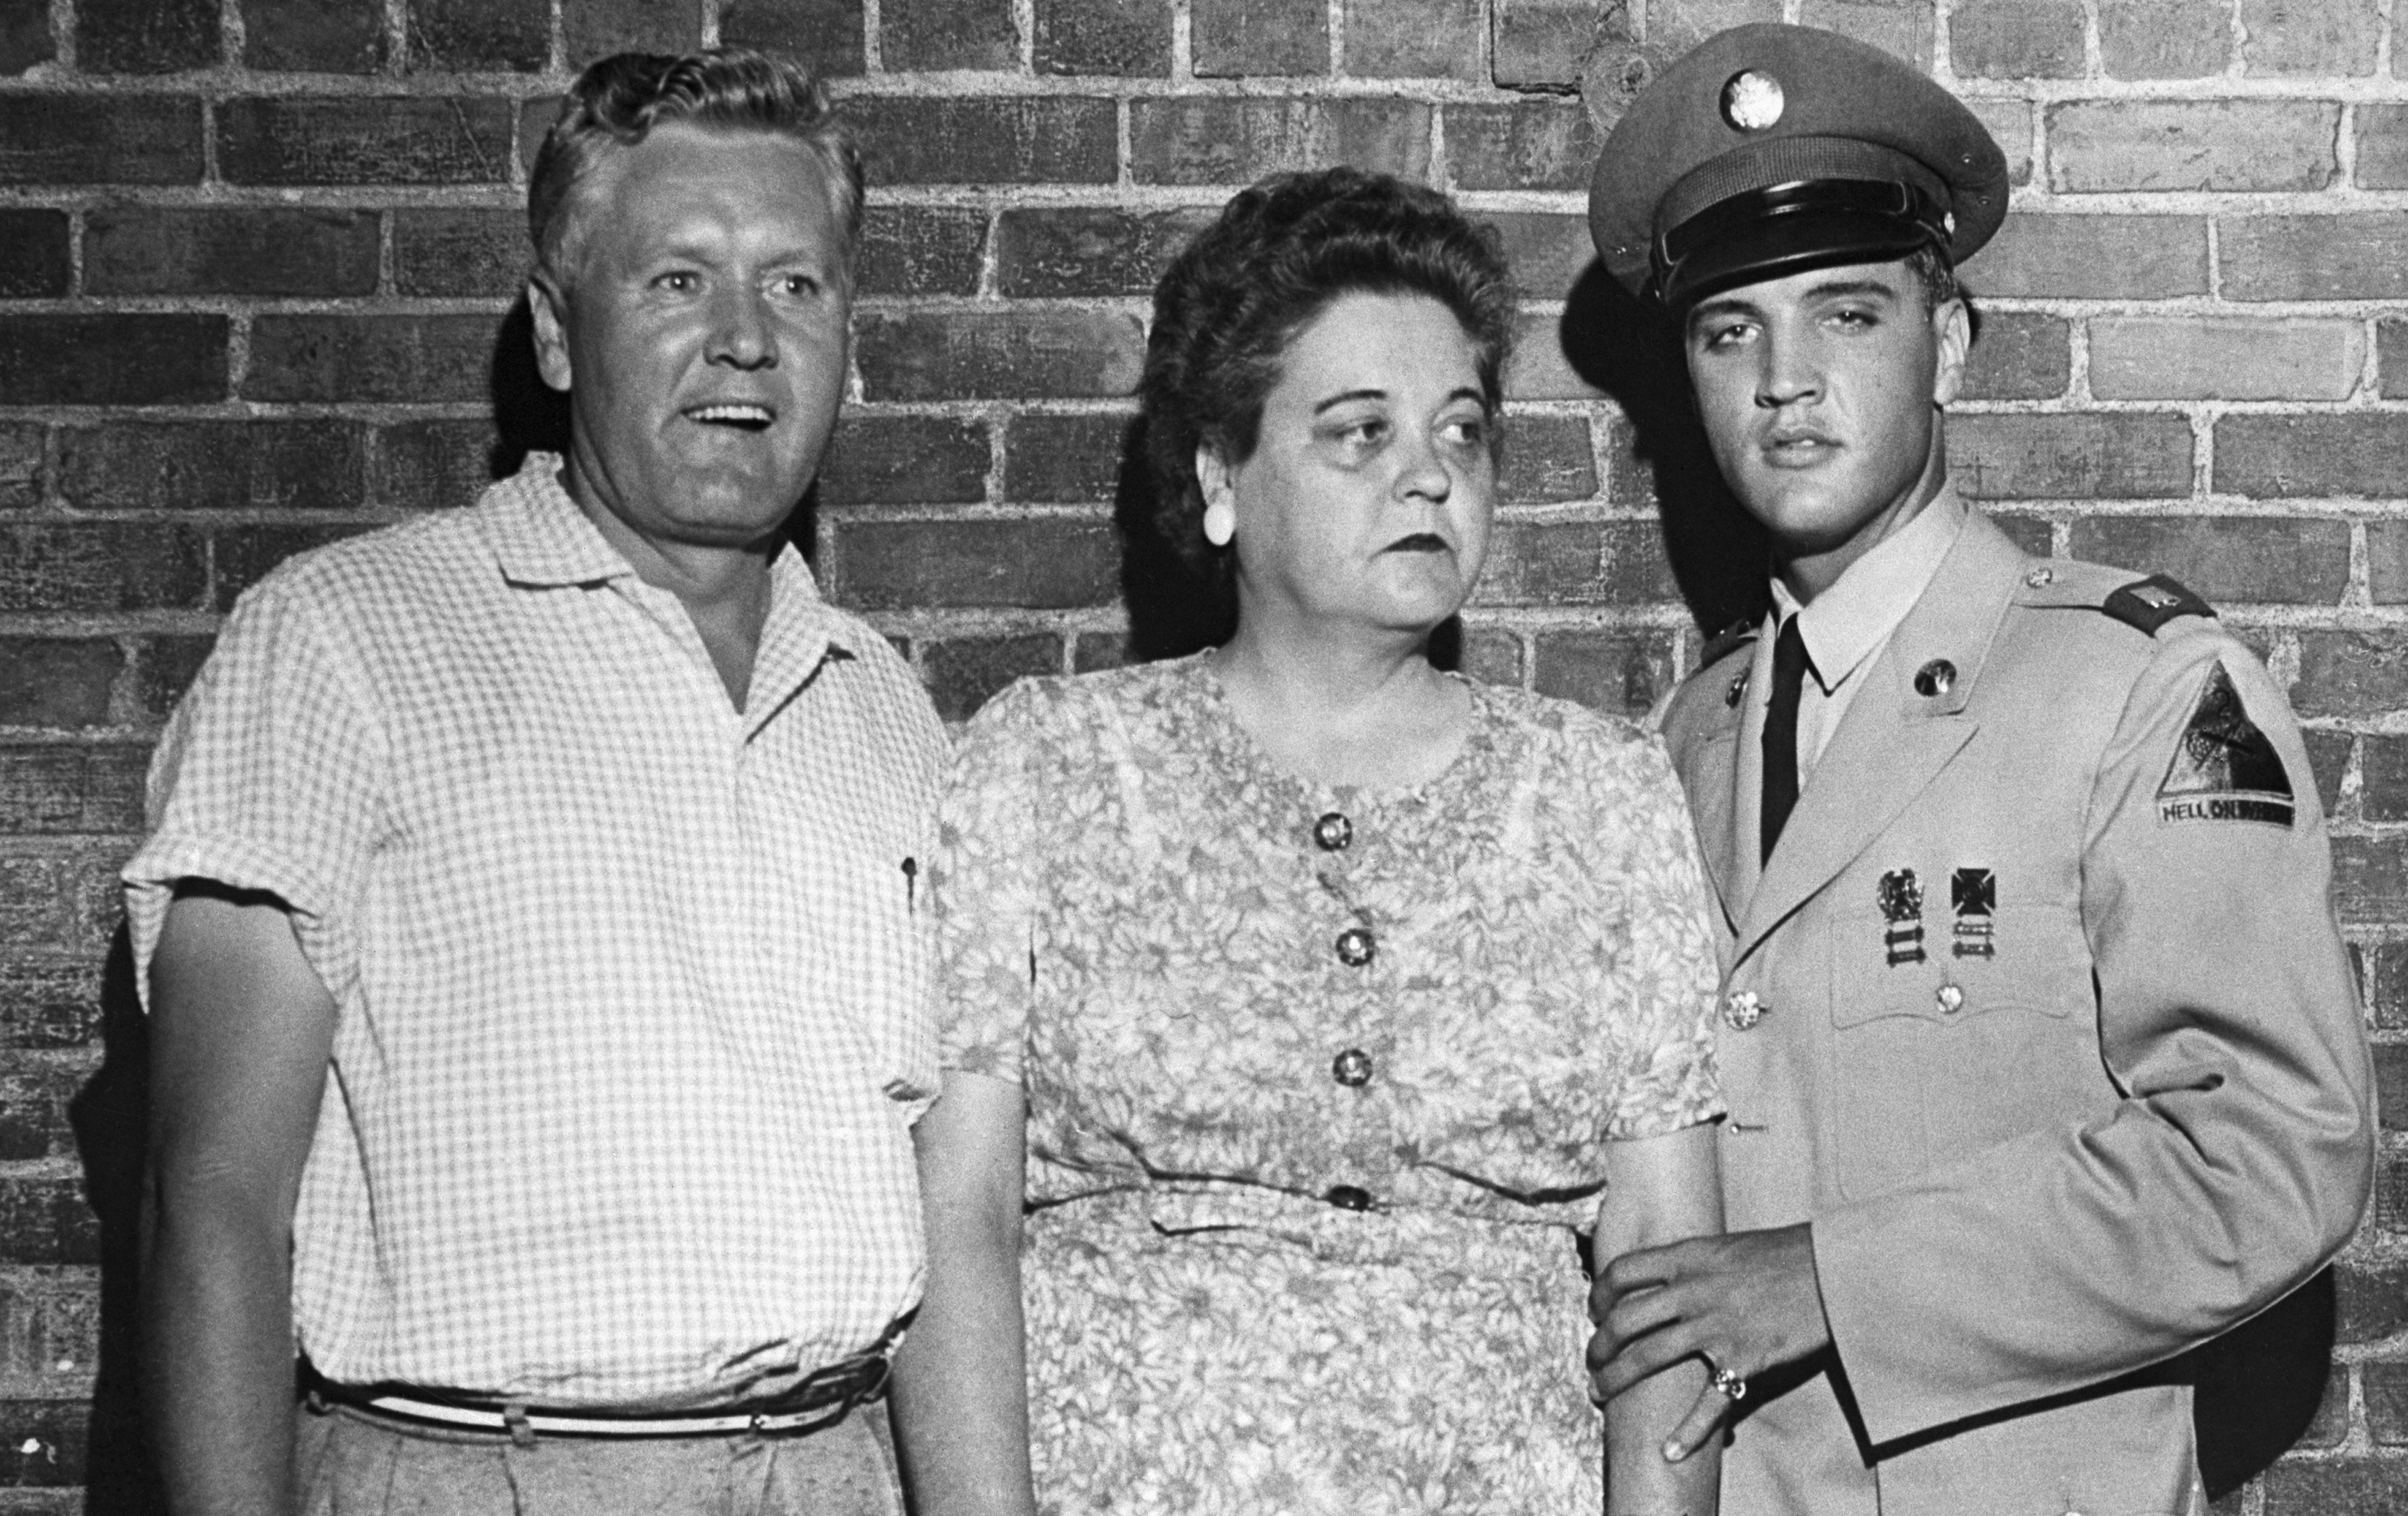 Elvis Presley, on his first leave from the Army, escorts his parents, Mr. and Mrs. Presley, from their mansion here to town for a sneak preview of the entertainer's latest movie, June 1st. | Source: Getty Images